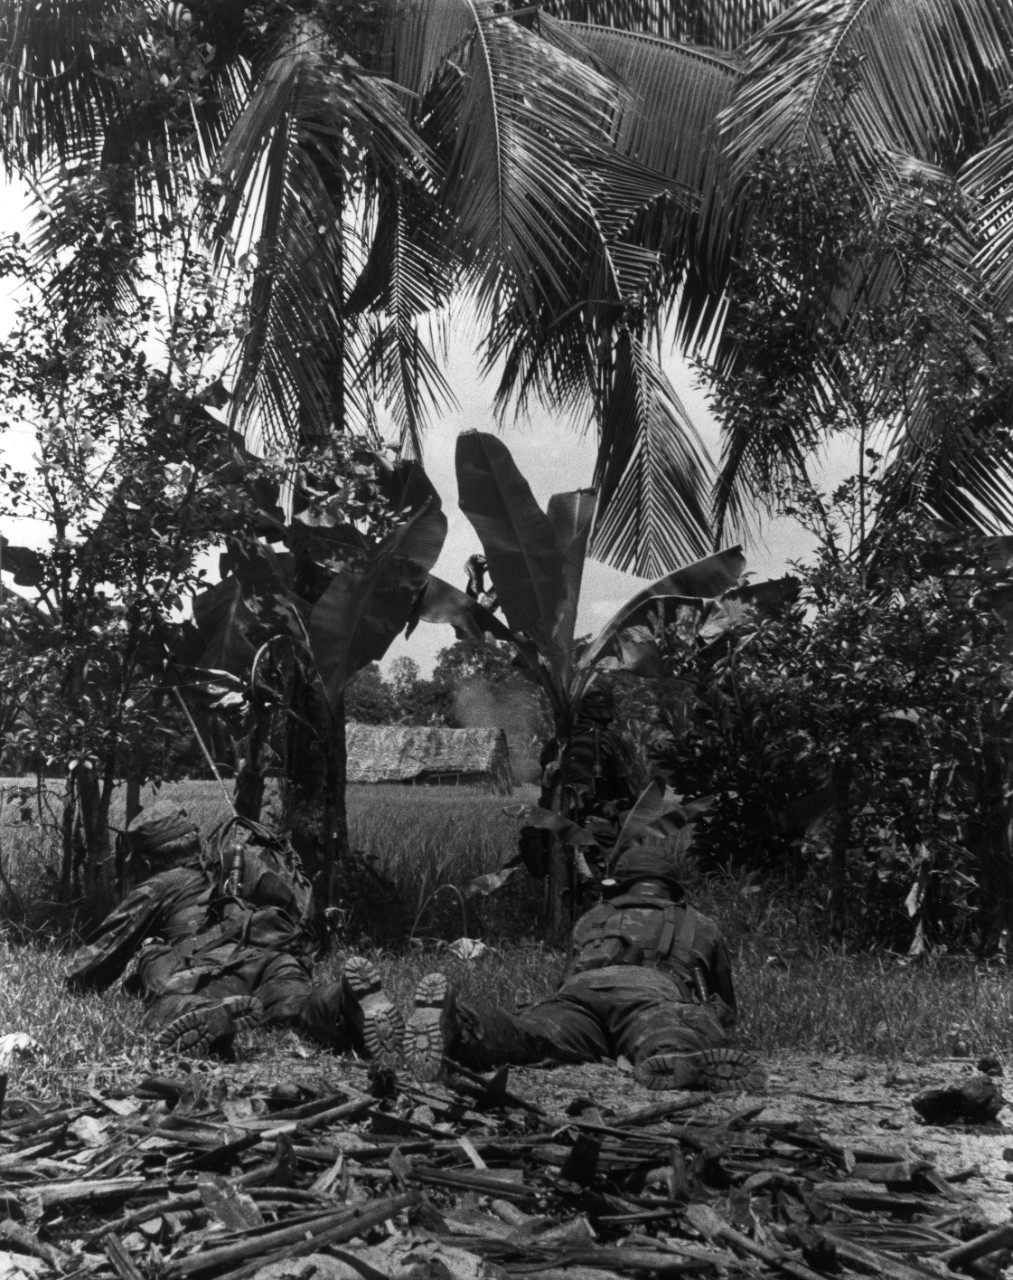 Vinh Binh, Republic of Vietnam - Members of a Navy SEAL Team fire on an enemy bunker camouflaged as a Vietnamese hut, during Operation Crimson Tide.